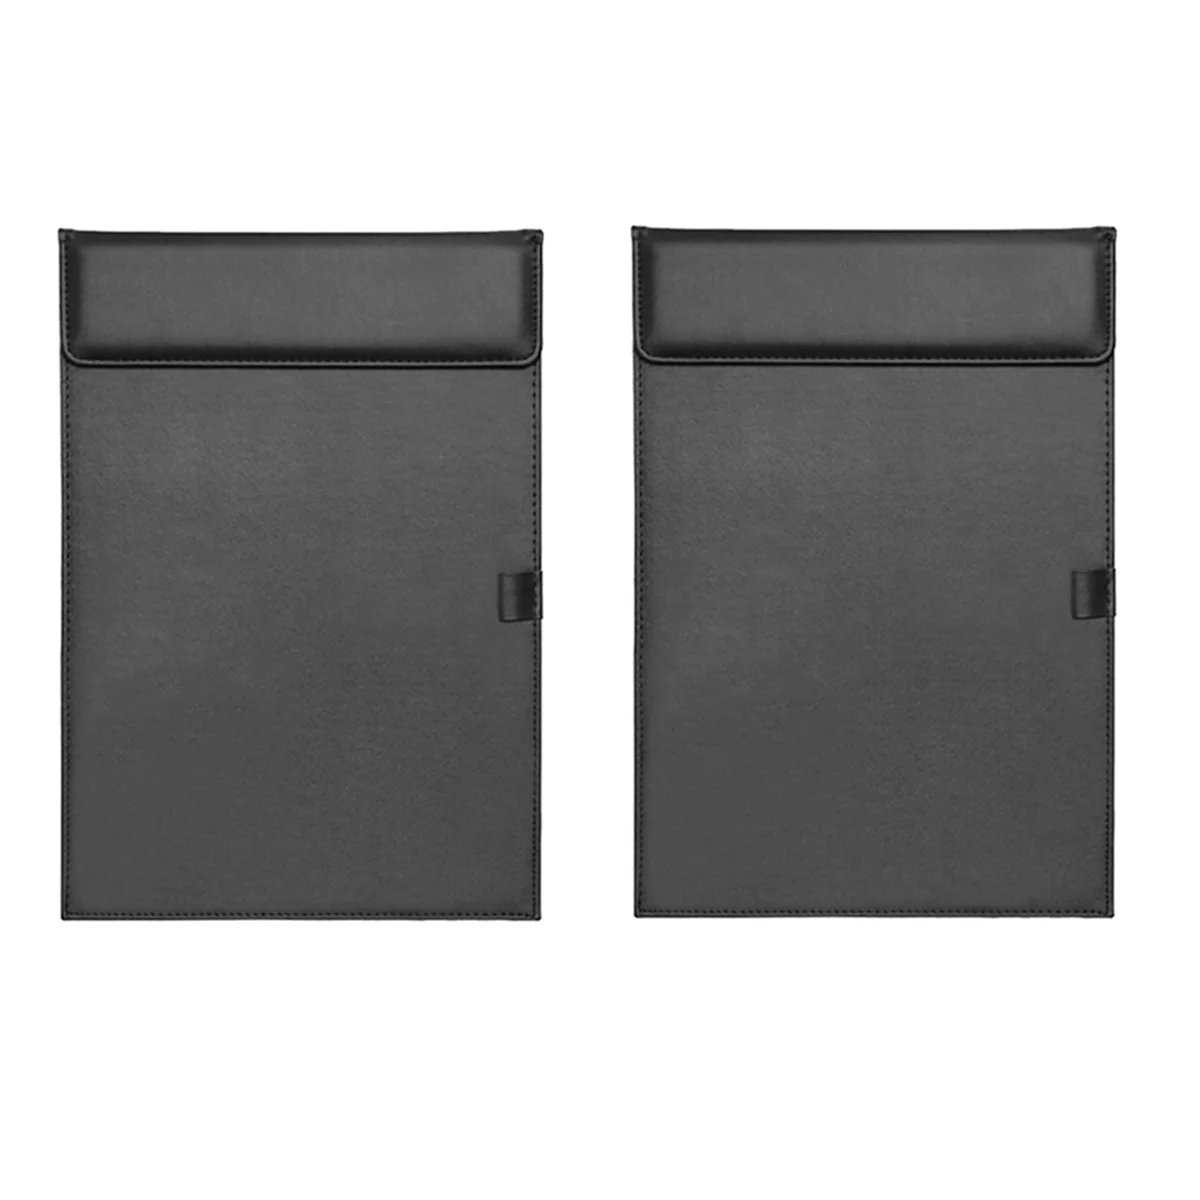 

Desktop File PU Leather Folder A4 Meeting Clipboard Office Meeting Board Clip Black Data Binder with Pen Cover 2PCS